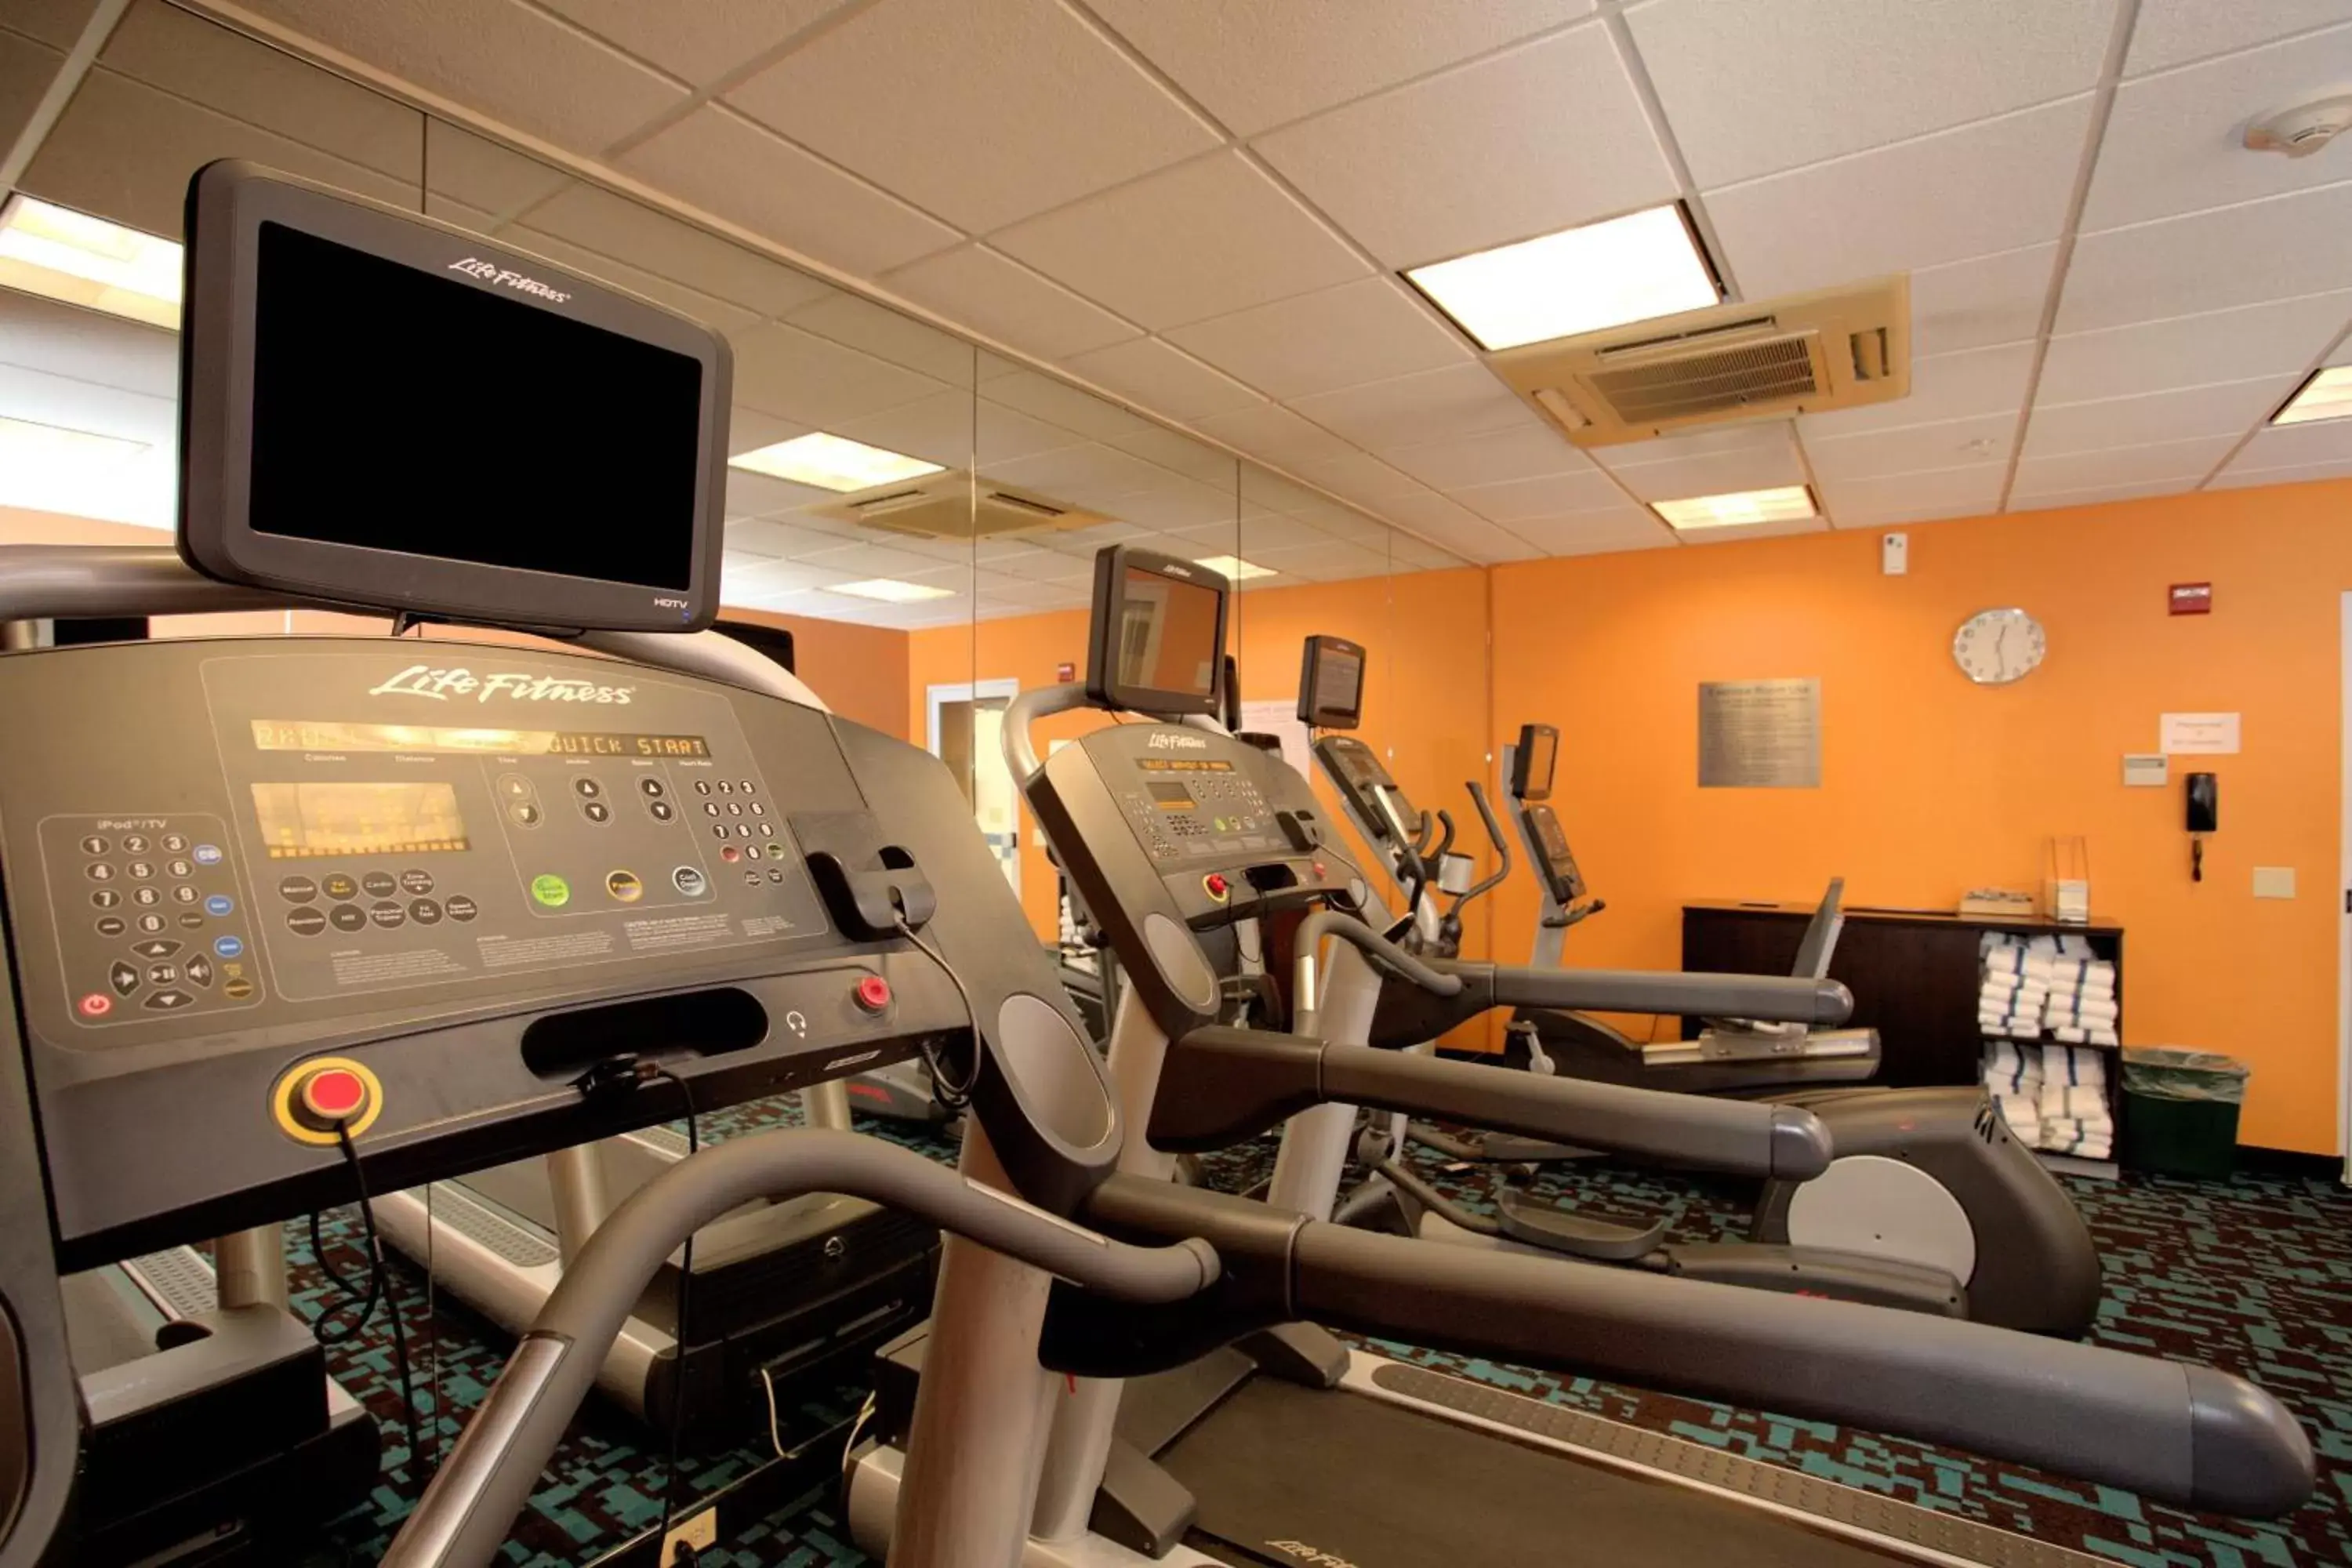 Fitness centre/facilities, Fitness Center/Facilities in Fairfield Inn & Suites by Marriott Edison - South Plainfield